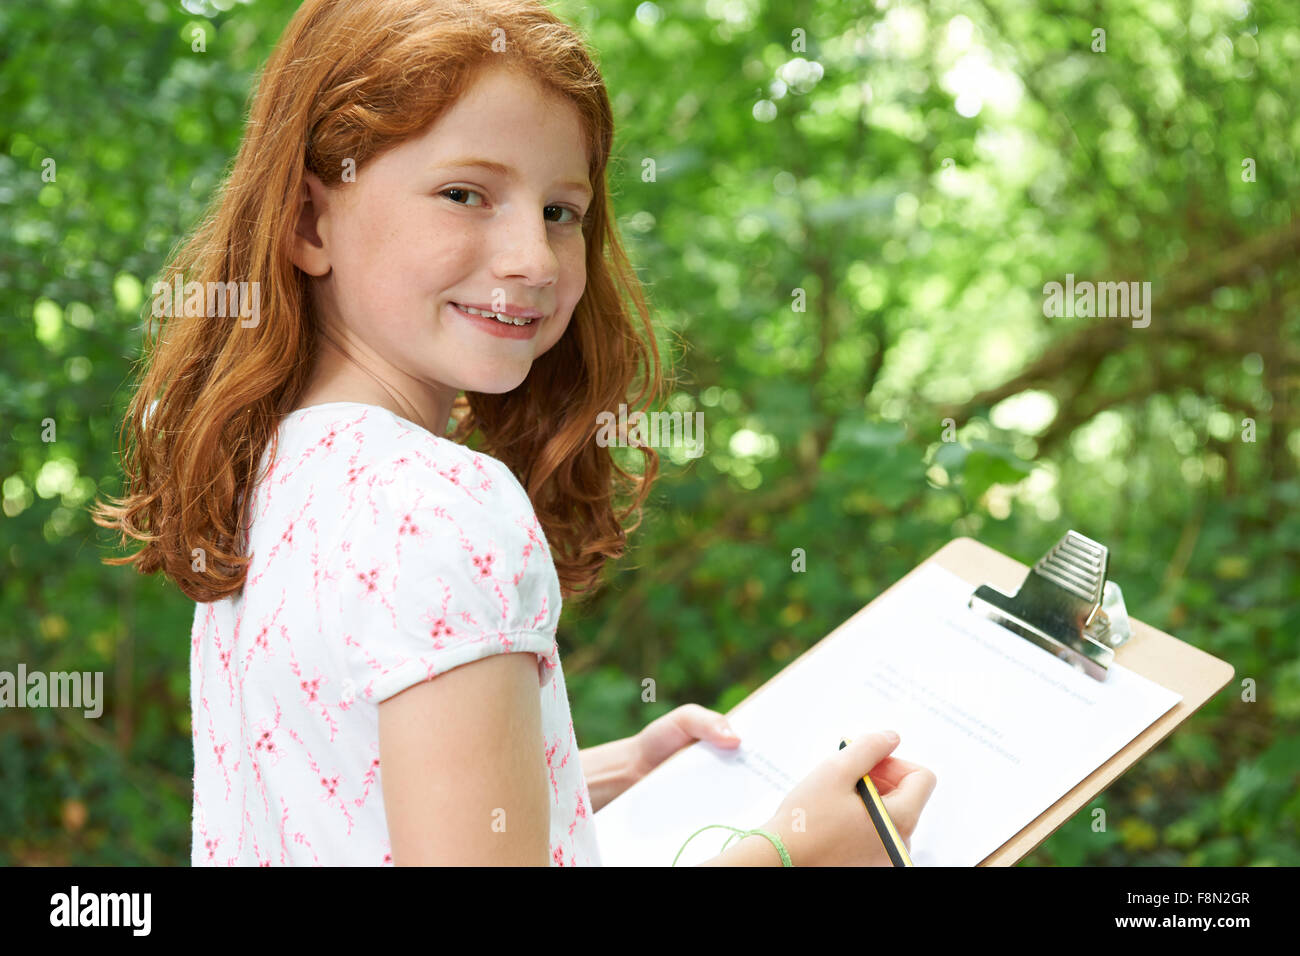 Girl Making Notes On School Nature Field Trip Stock Photo